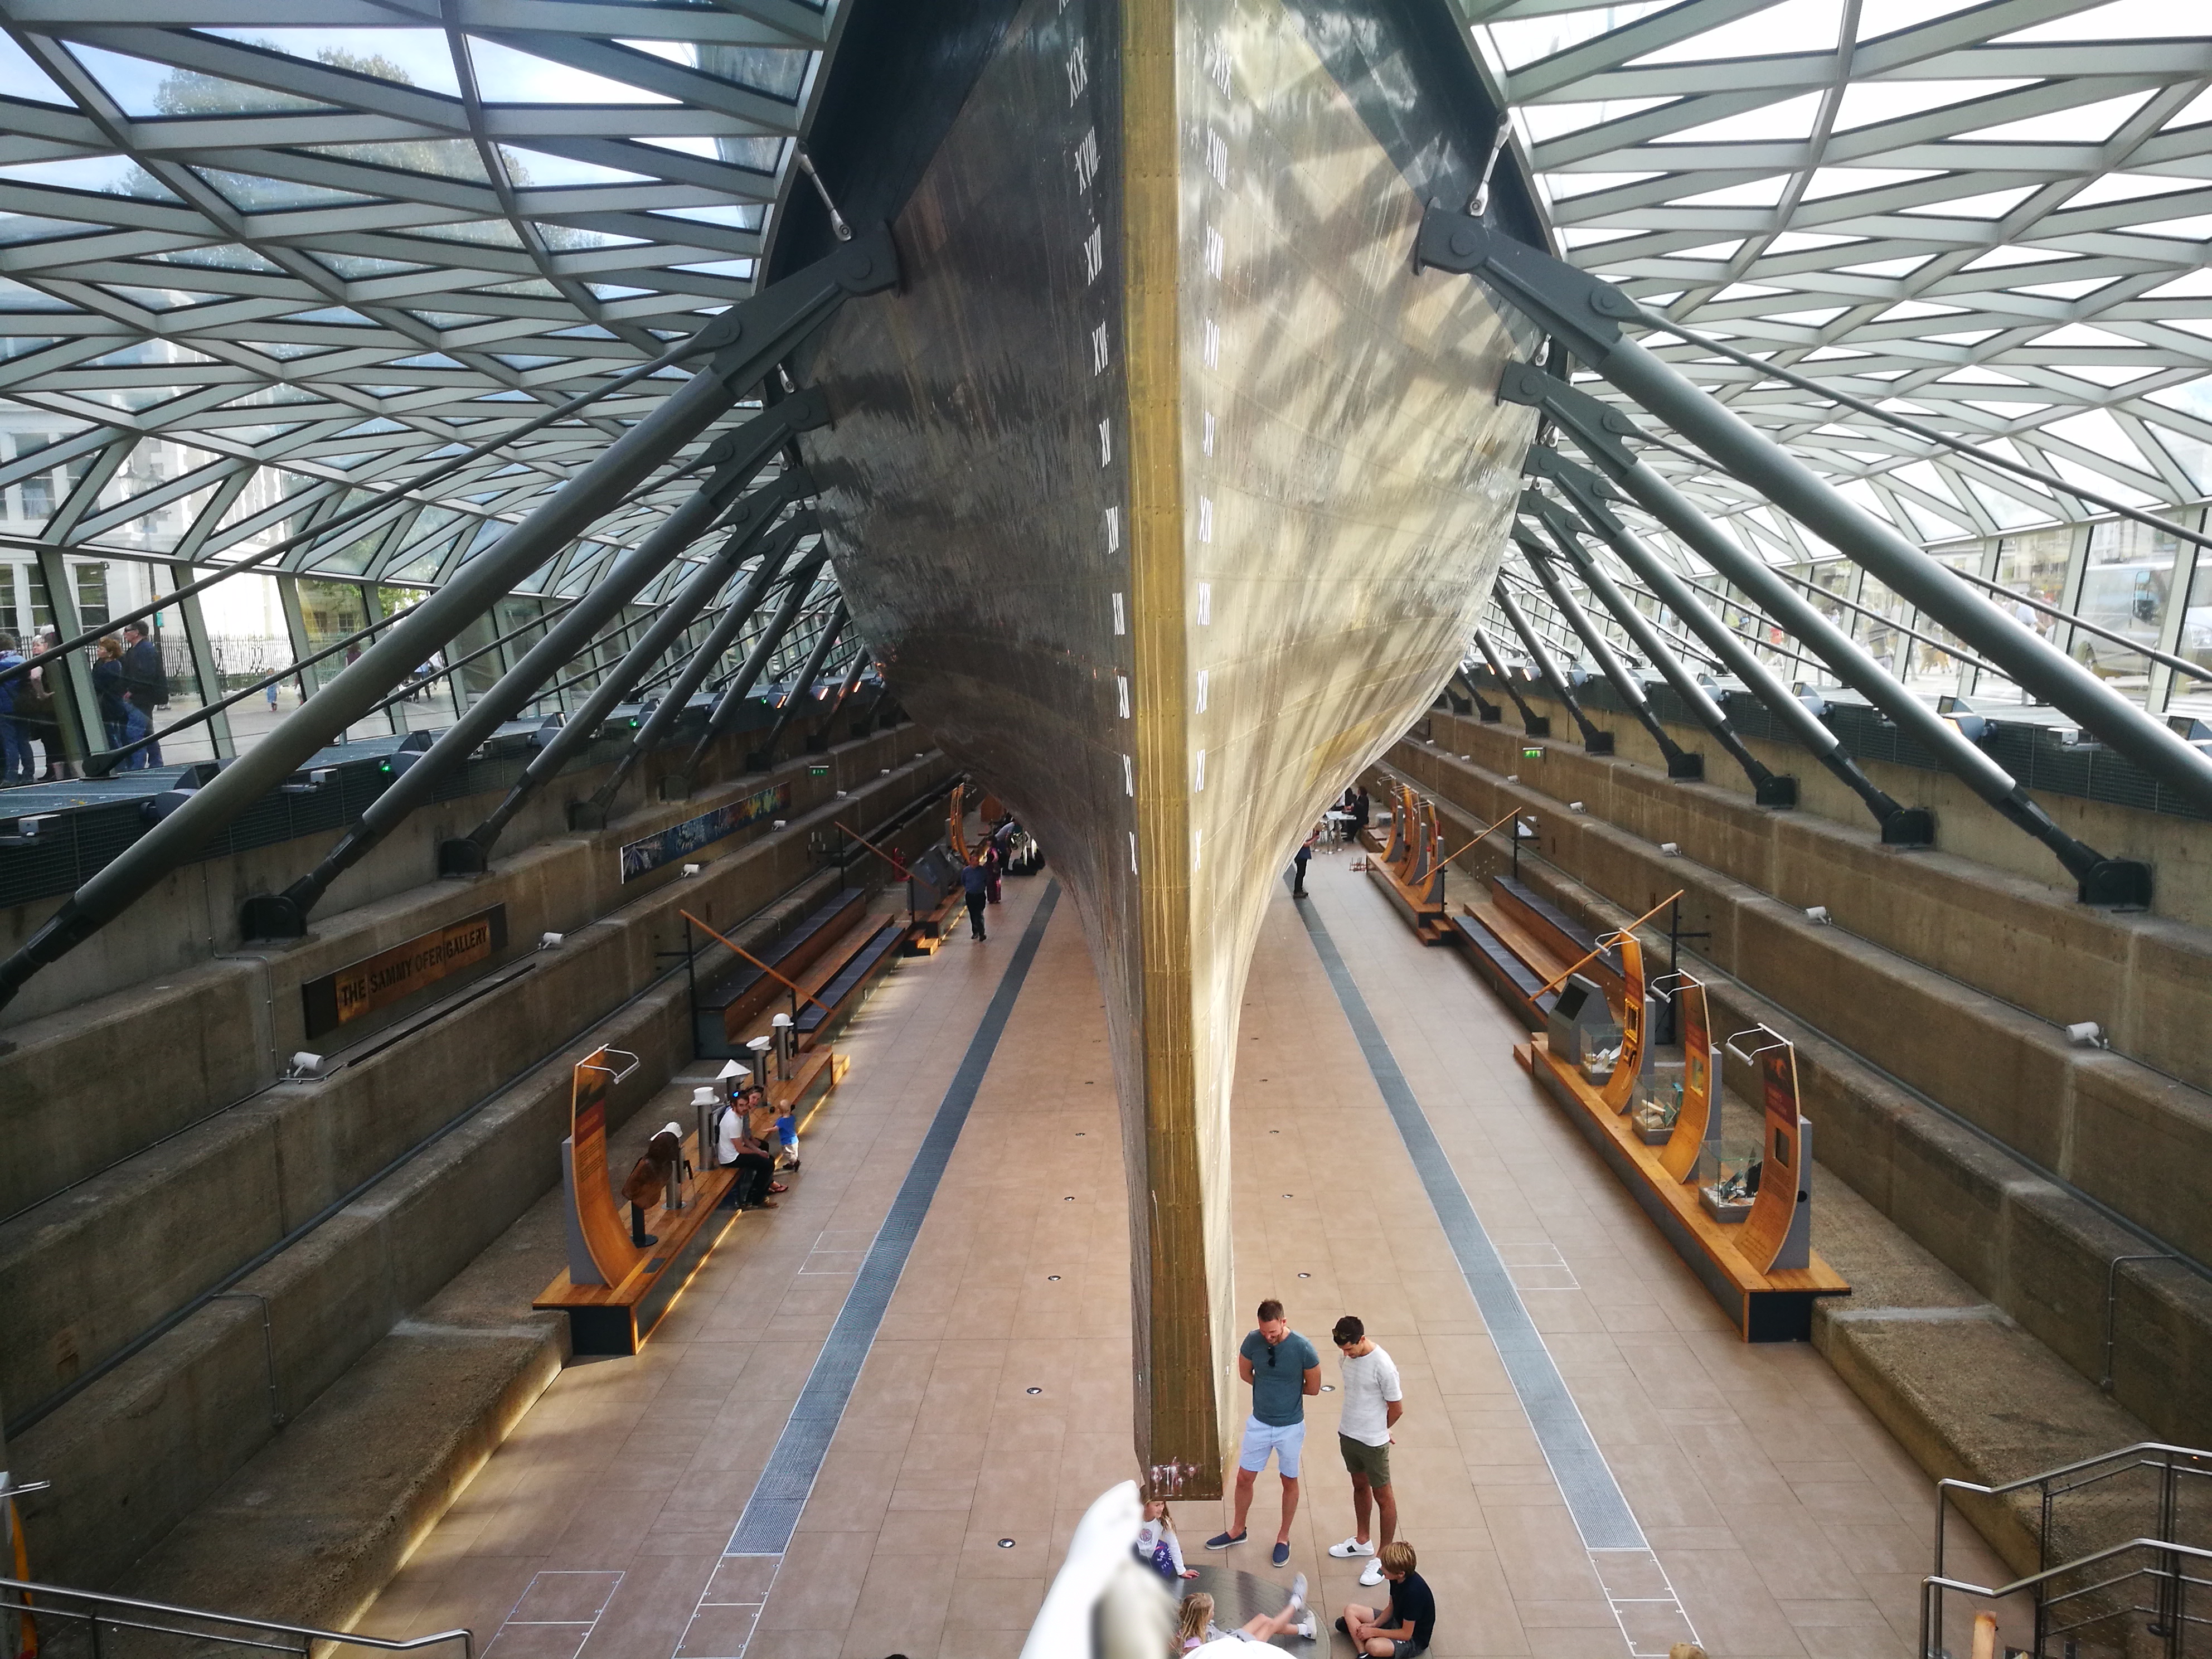 the ship's hull, taken from underneath, showing the architectural ribbing of the dry dock supports and the crystal glass 